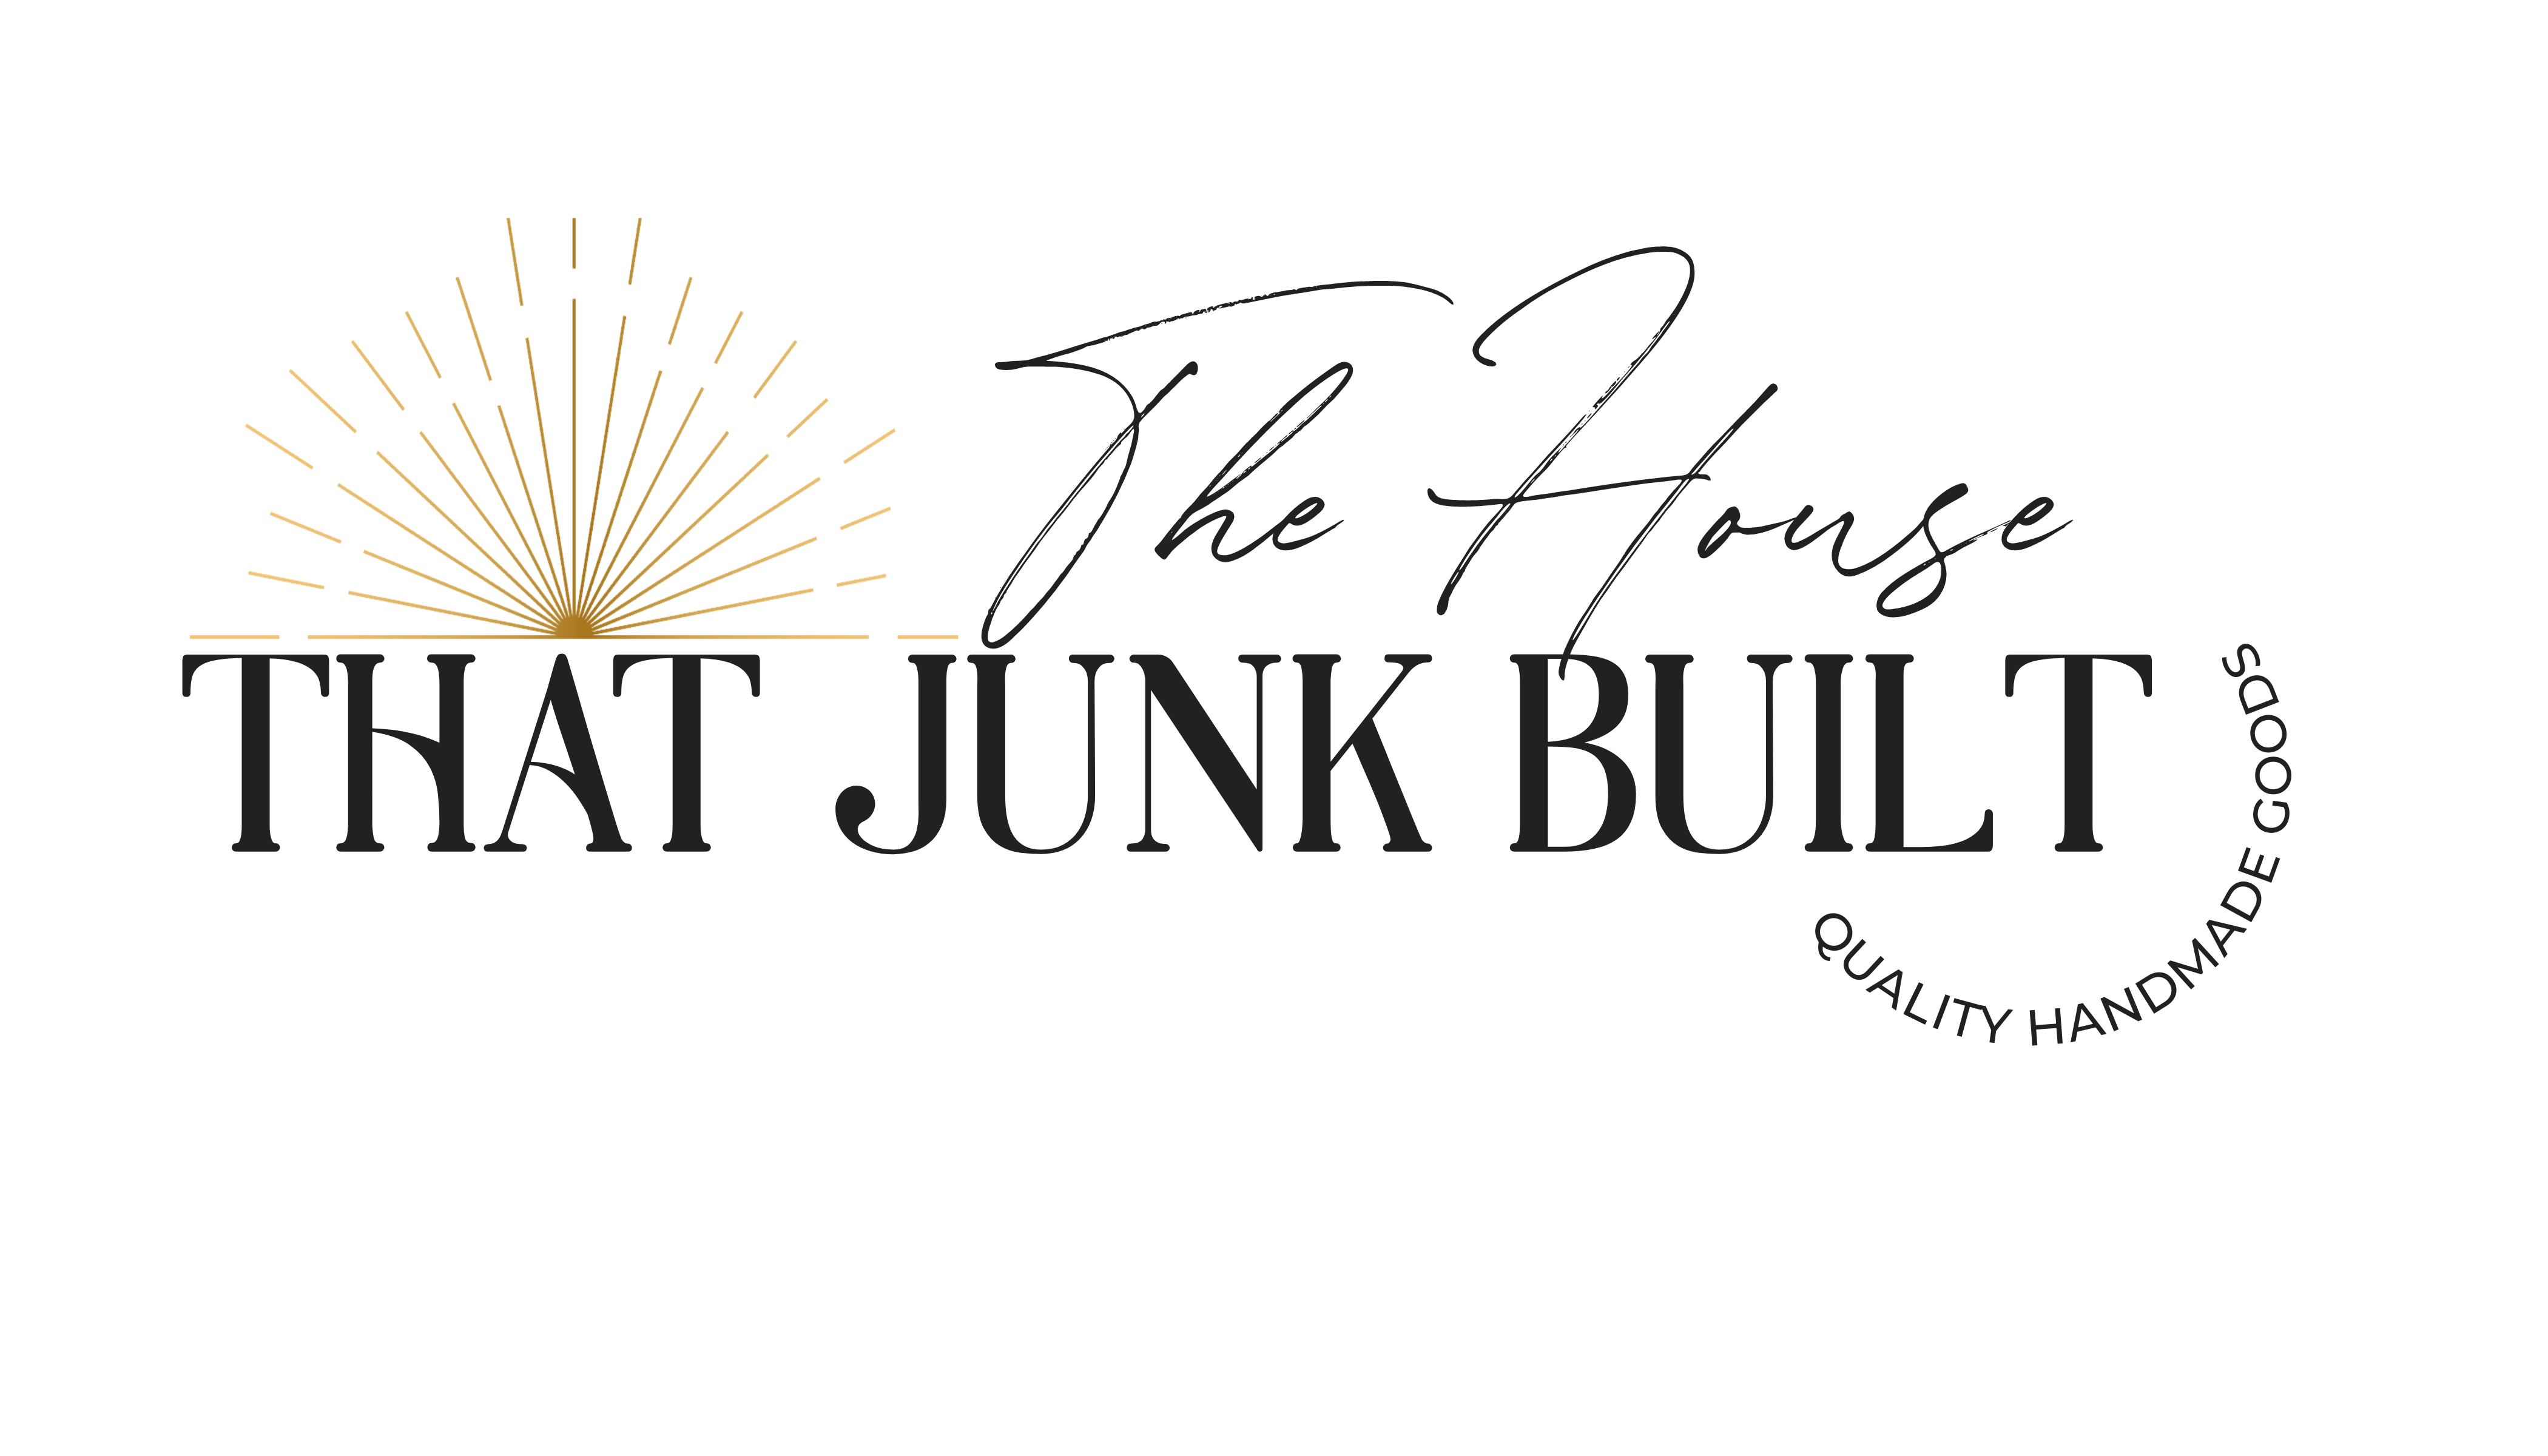 The House That Junk Built